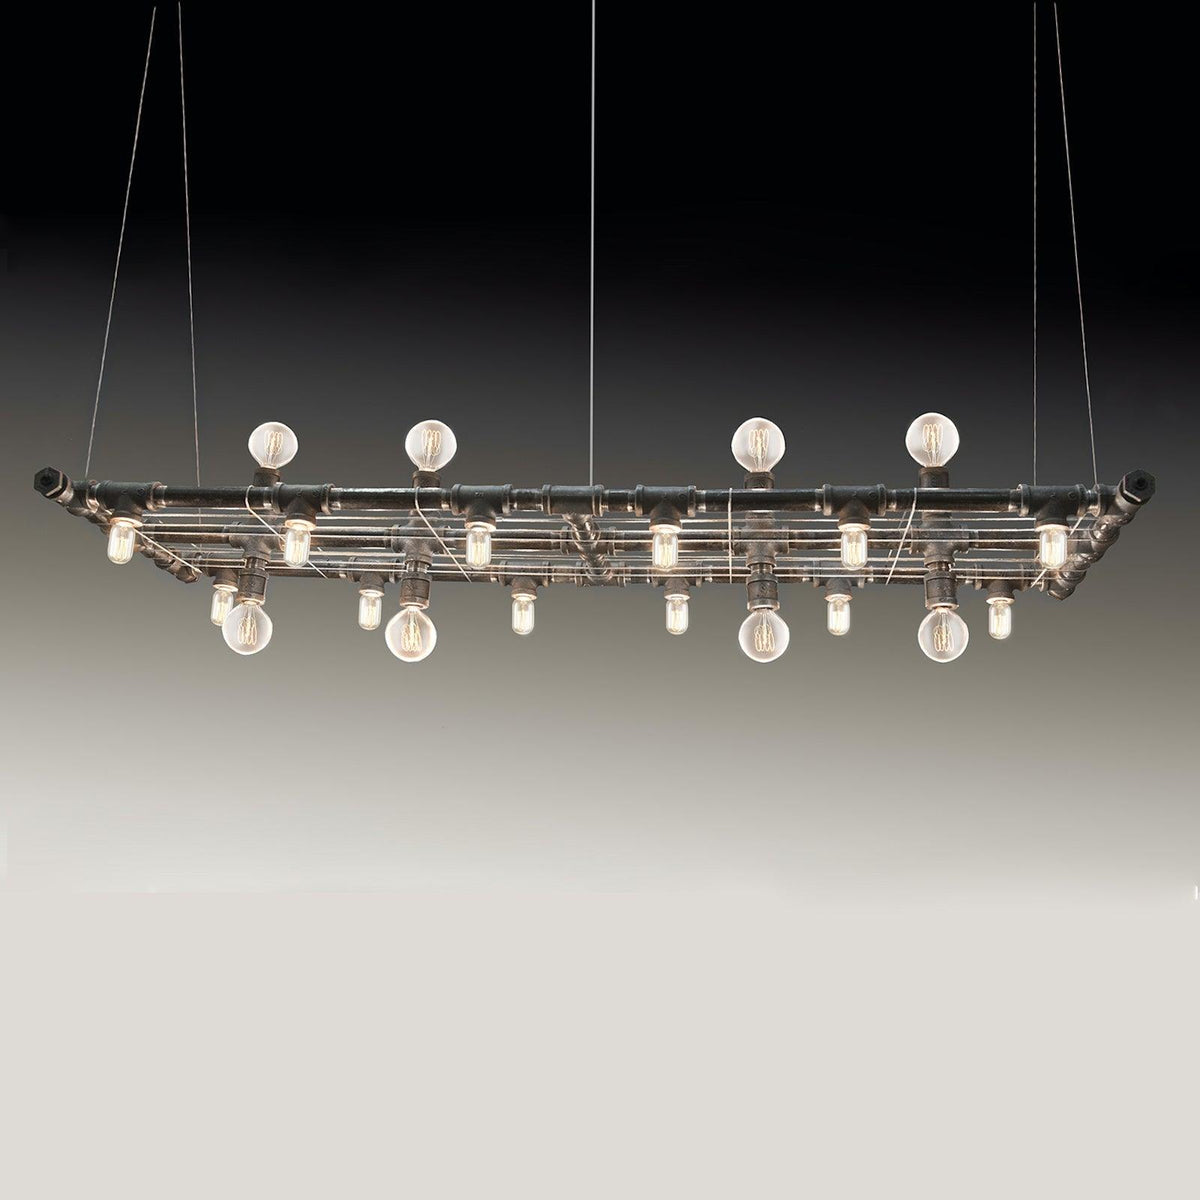 Michael Mchale Designs - Raw Banqueting Linear Suspension - RAW-3 | Montreal Lighting & Hardware